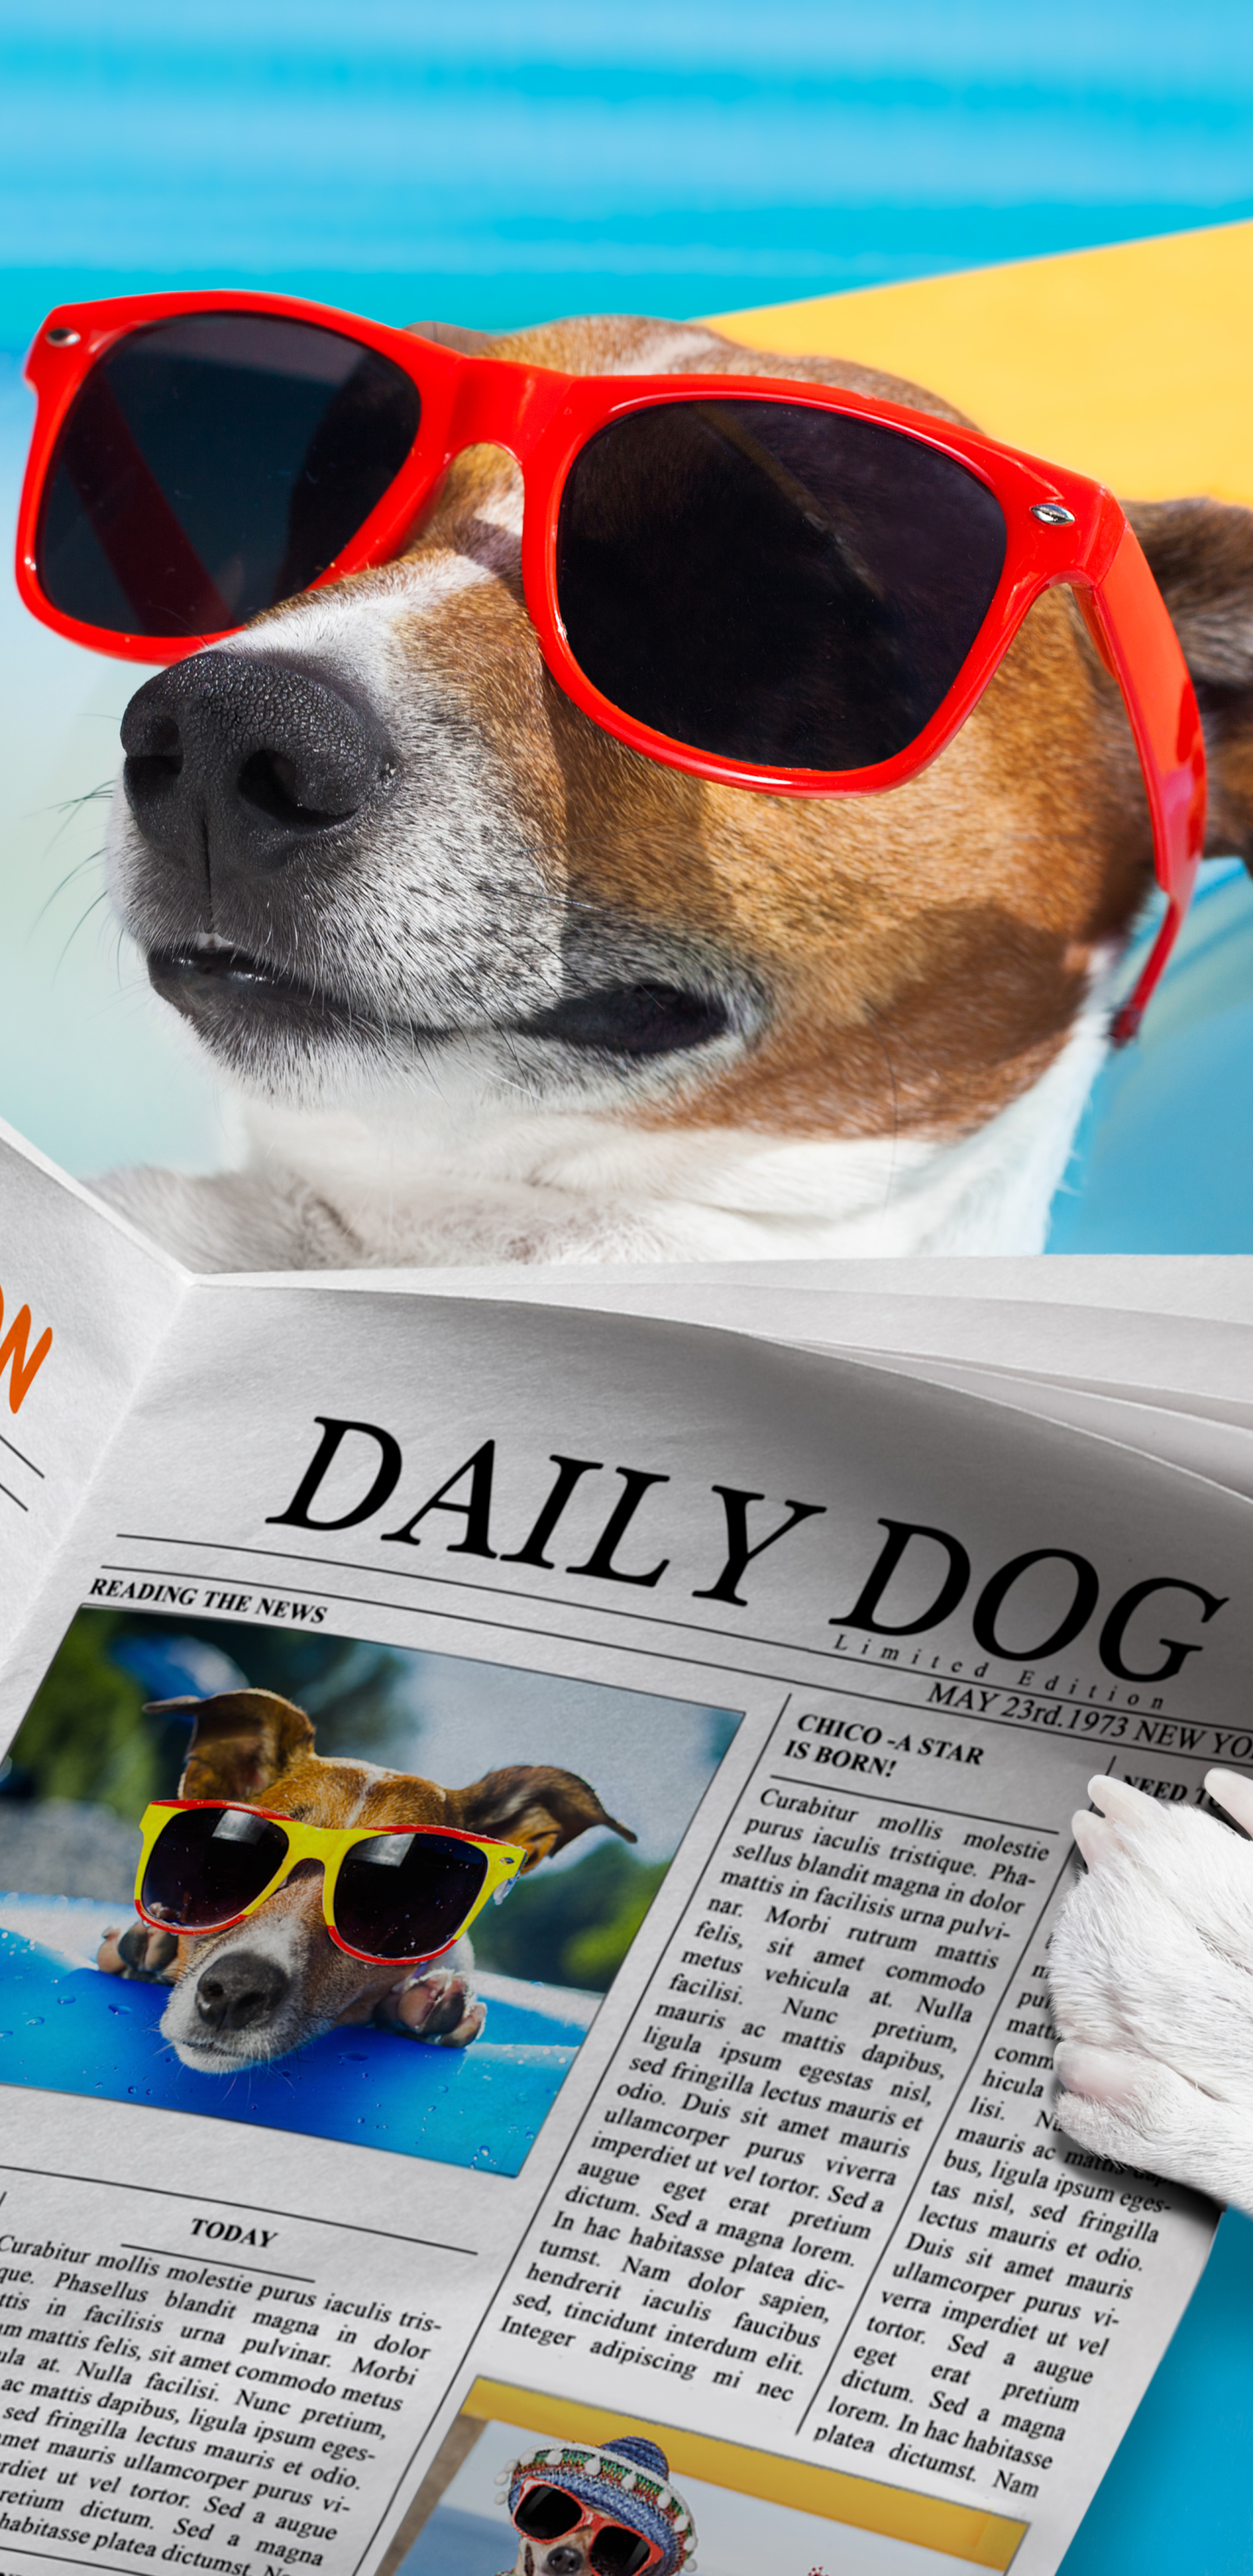 humor, dog, summer, newspaper, sunglasses, jack russell terrier High Definition image